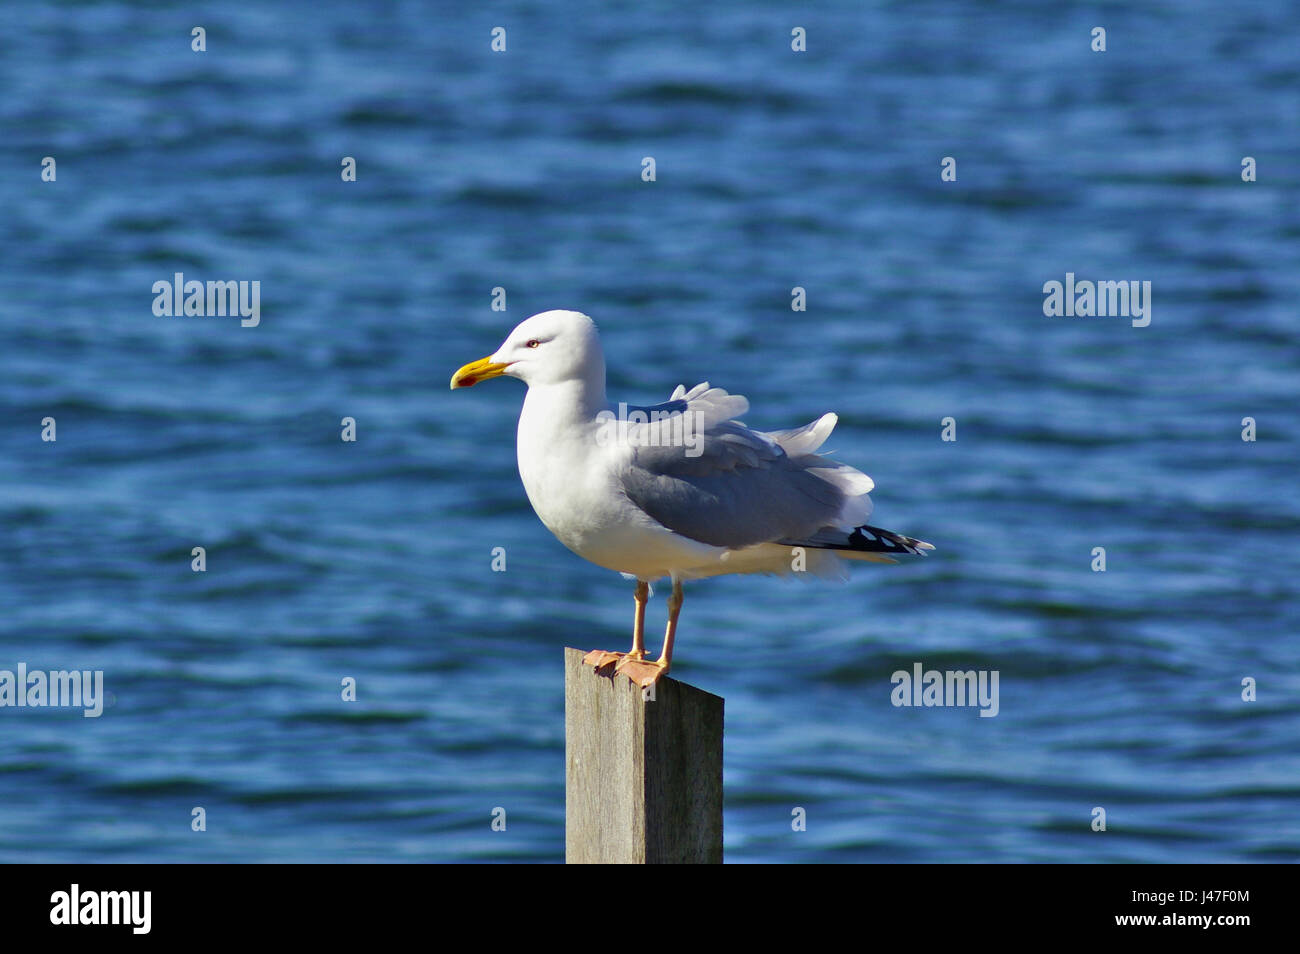 Herring gull with wind-ruffled feathers sitting atop a mooring post with blue water in the background Stock Photo